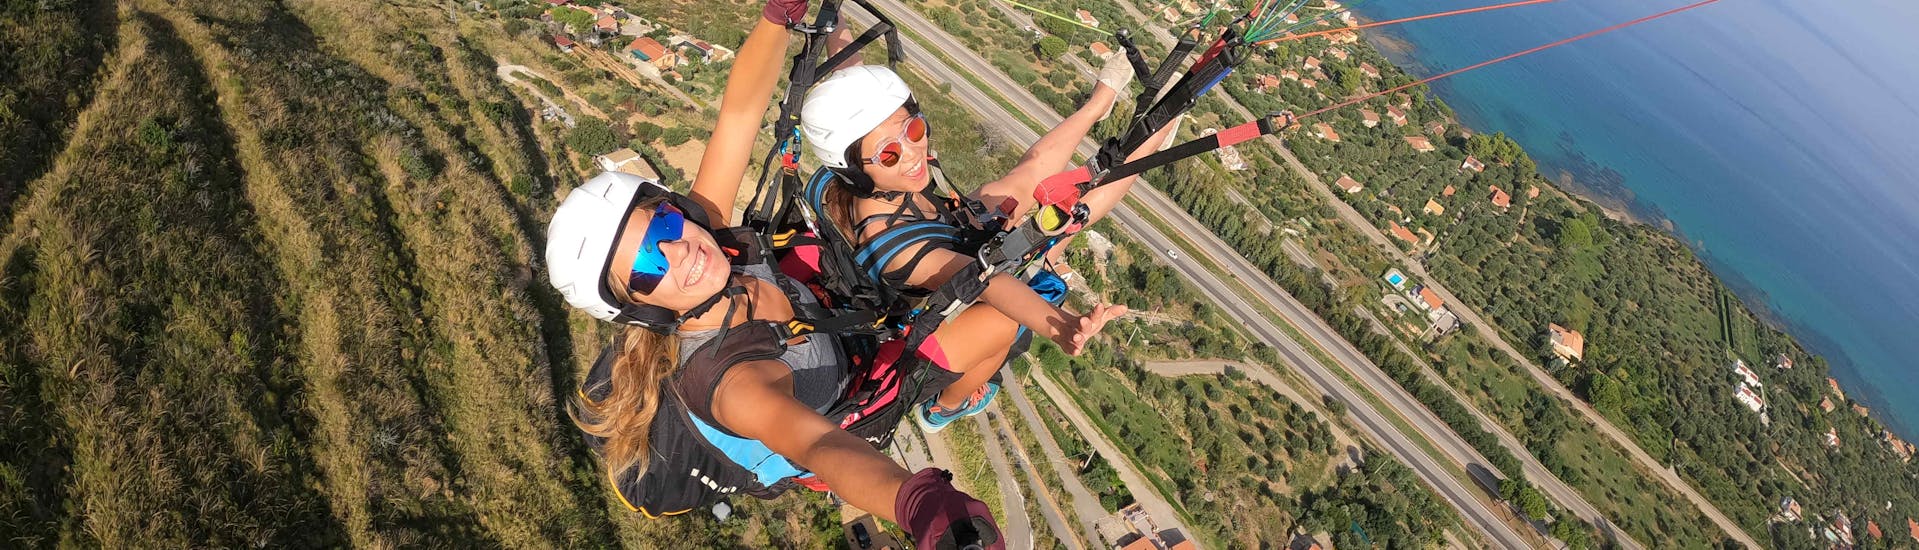 Two people are enjoying their experience in Tandem Paragliding in Cefalù - Classic.